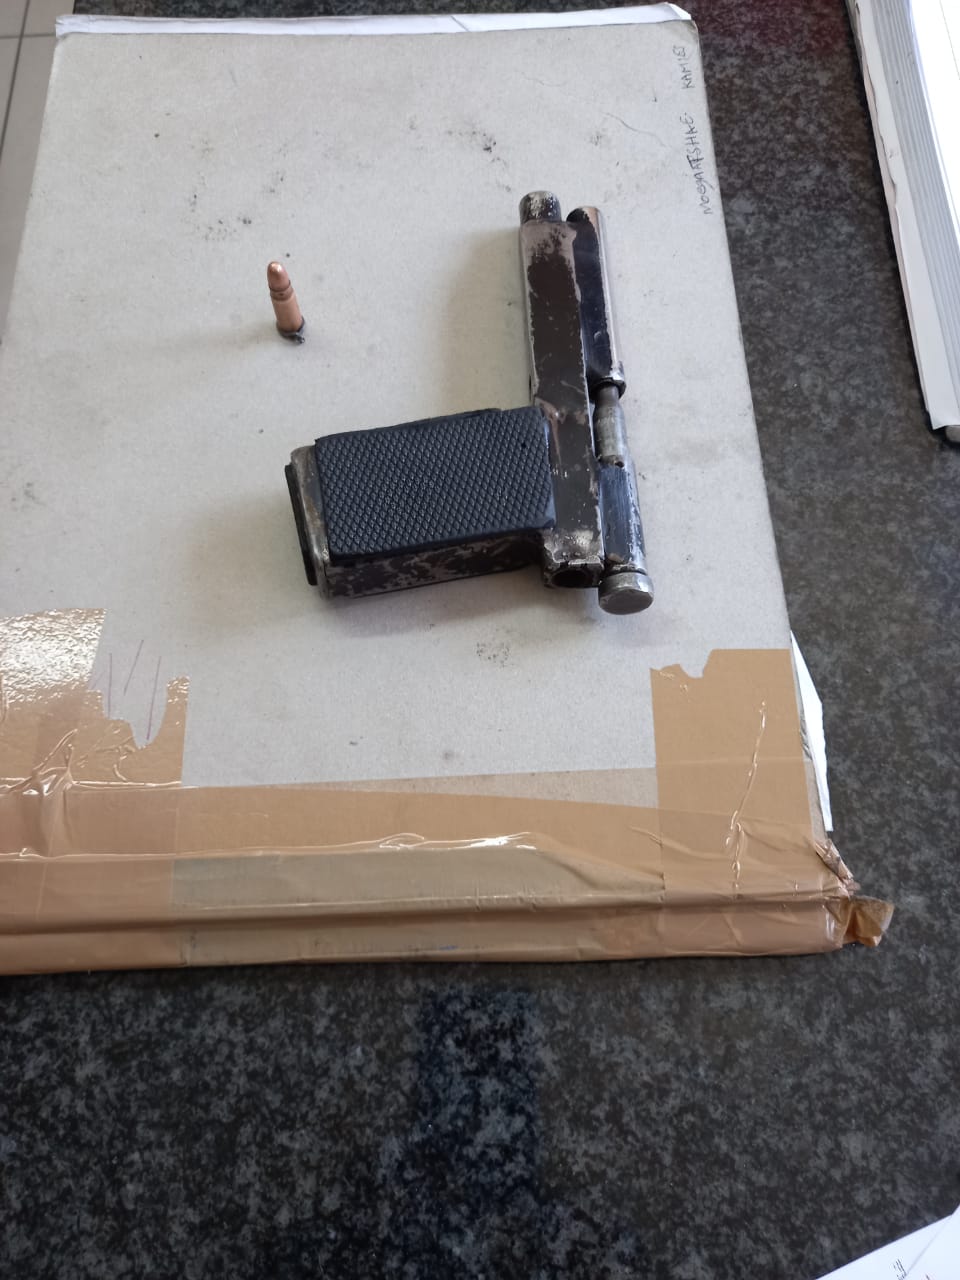 Two suspects arrested with homemade zip guns